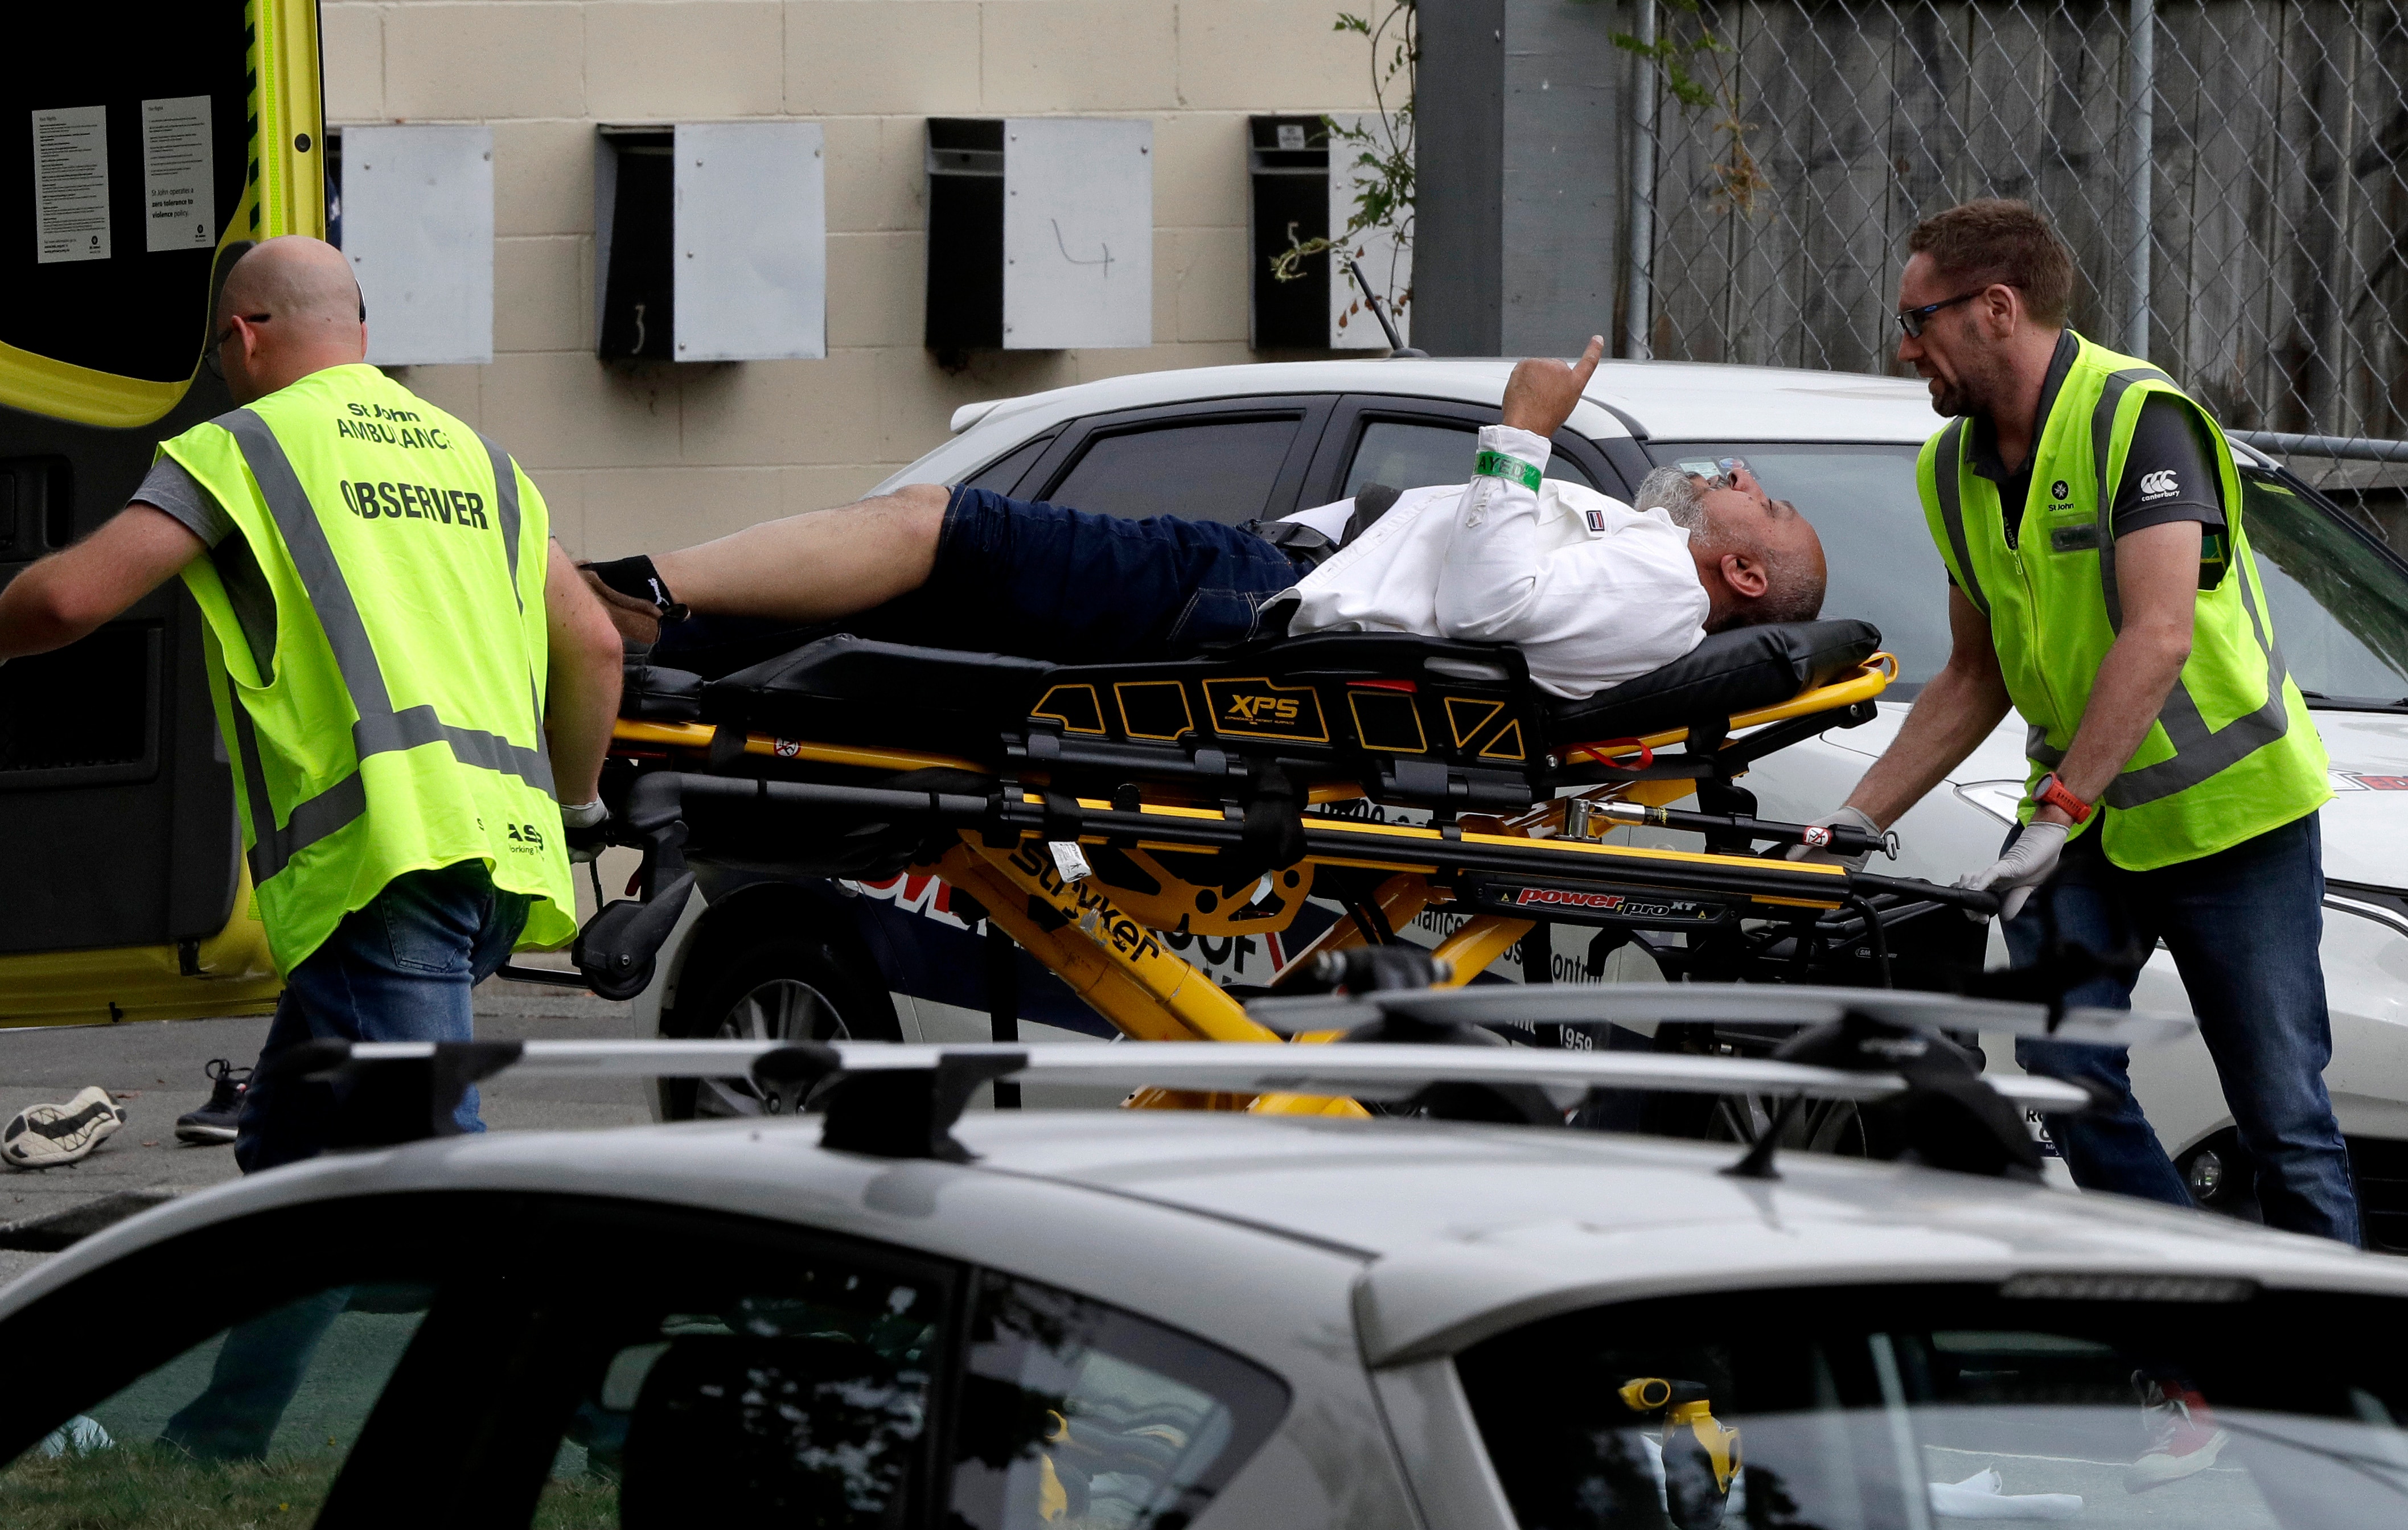 Ambulance staff take Mohsen Al-Harbi from outside a mosque in central Christchurch, New Zealand.